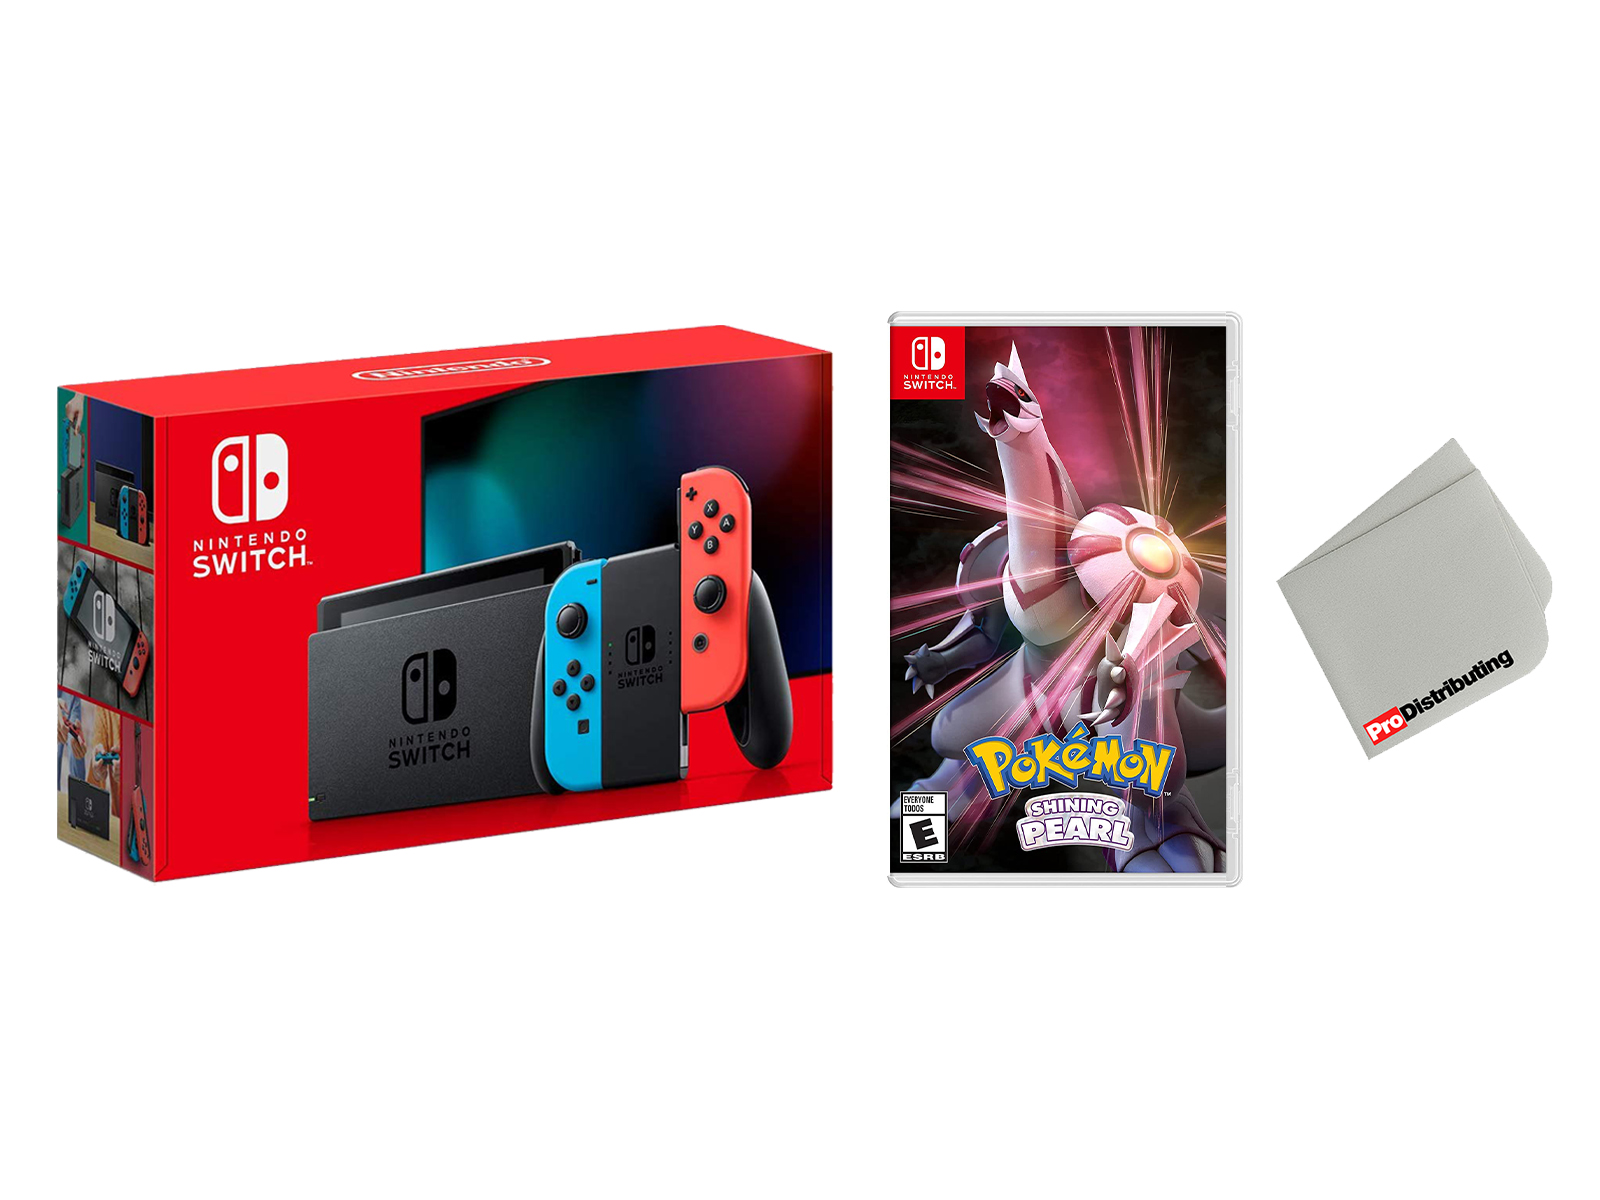 Nintendo Switch 32GB Console Neon Joy-Con Bundle with Pokemon Shining Pearl Game - Import with US Plug - image 1 of 1